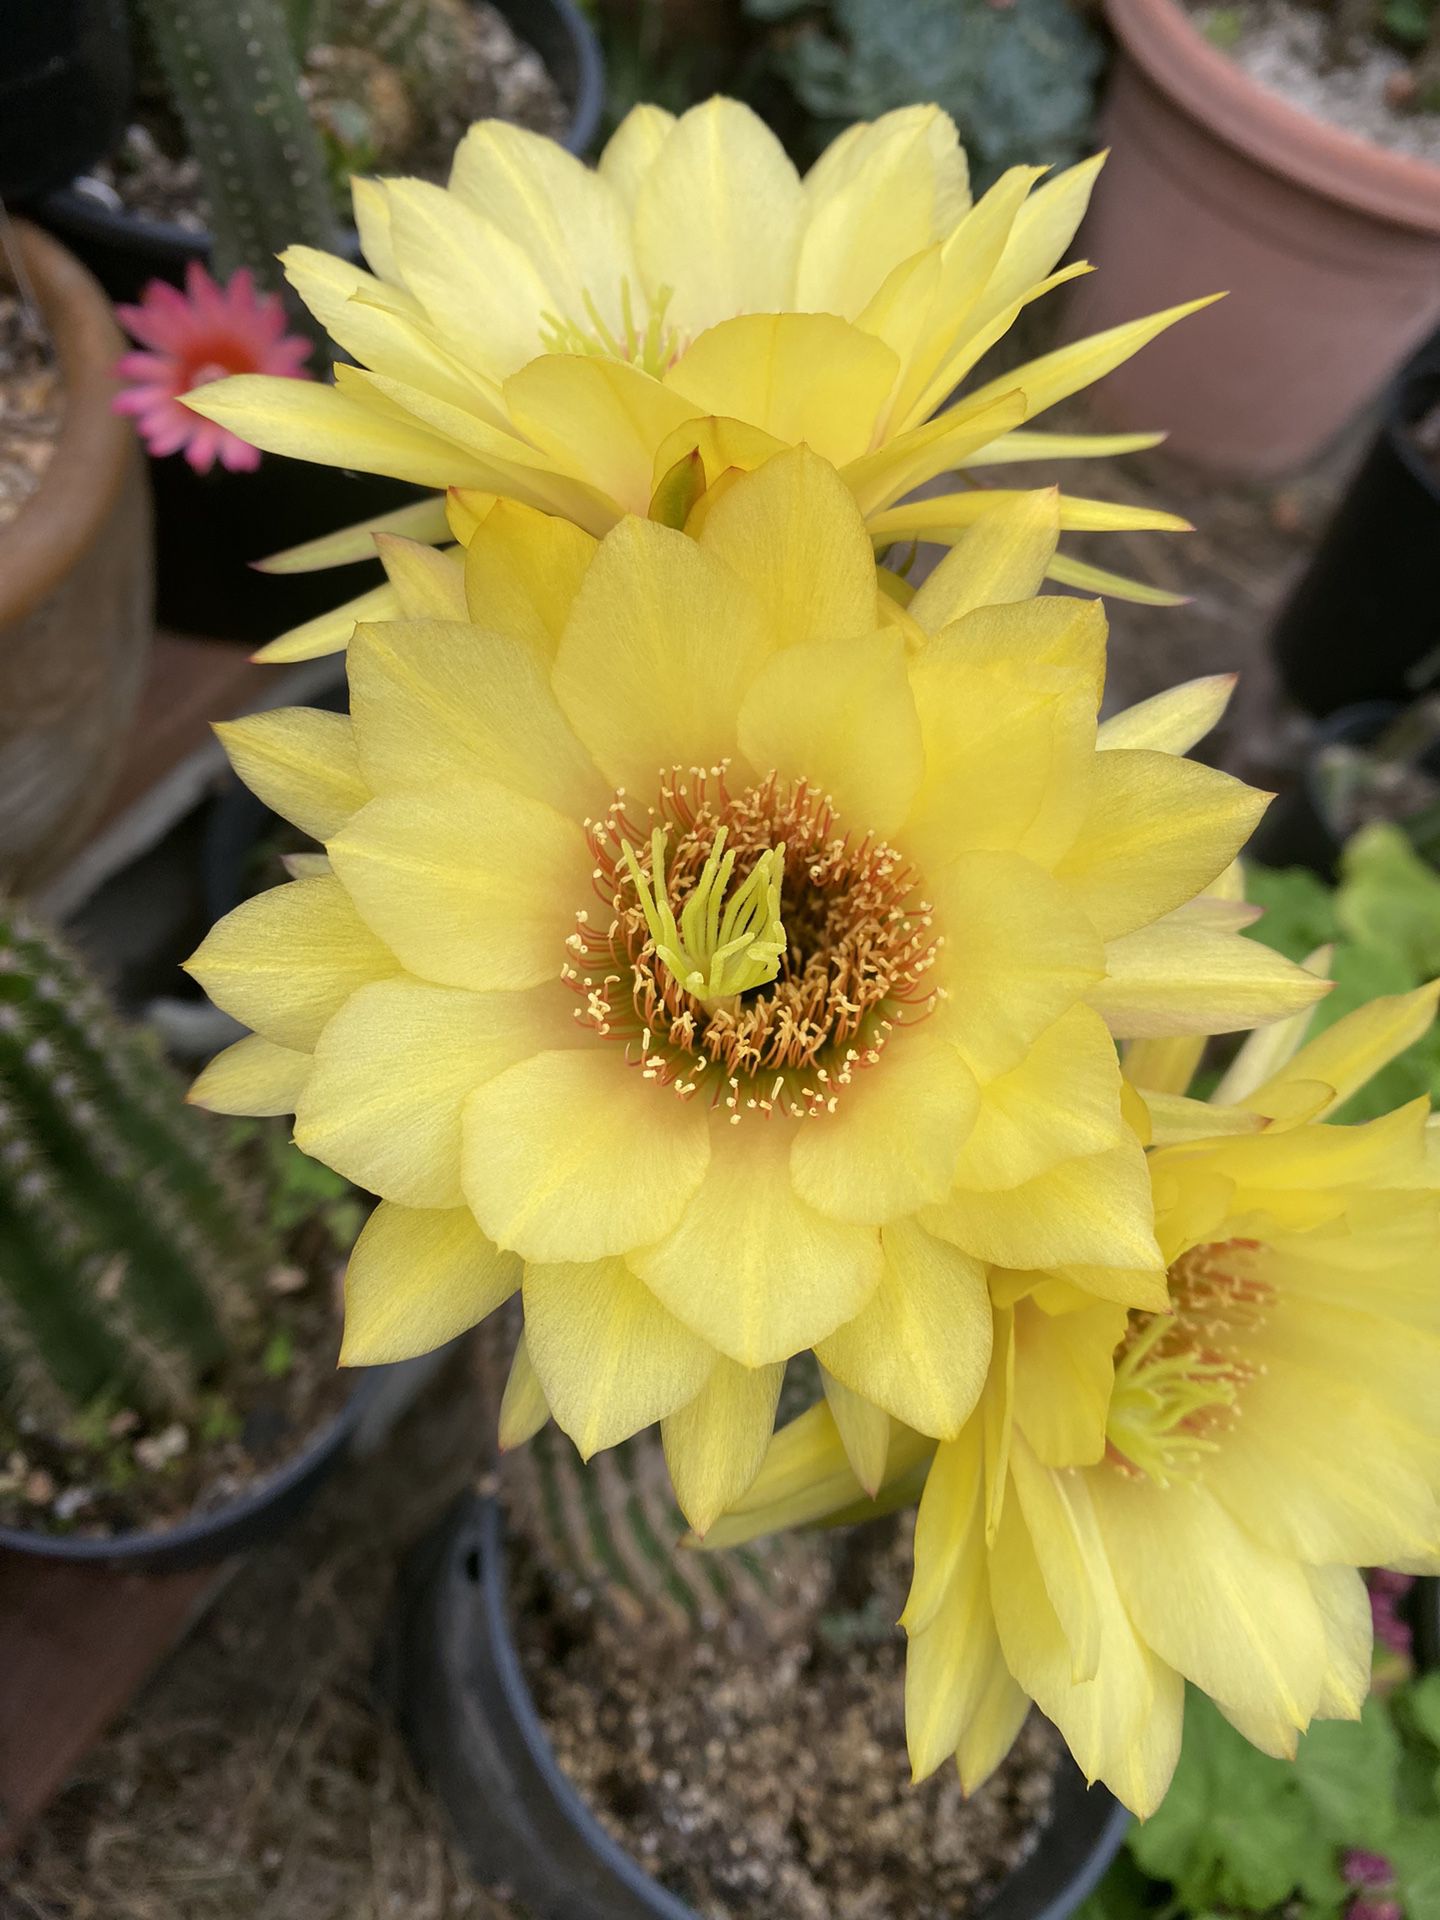 Blooming Big Flowers Cactus Plant, In 2 Gallons pot Pick Up only 